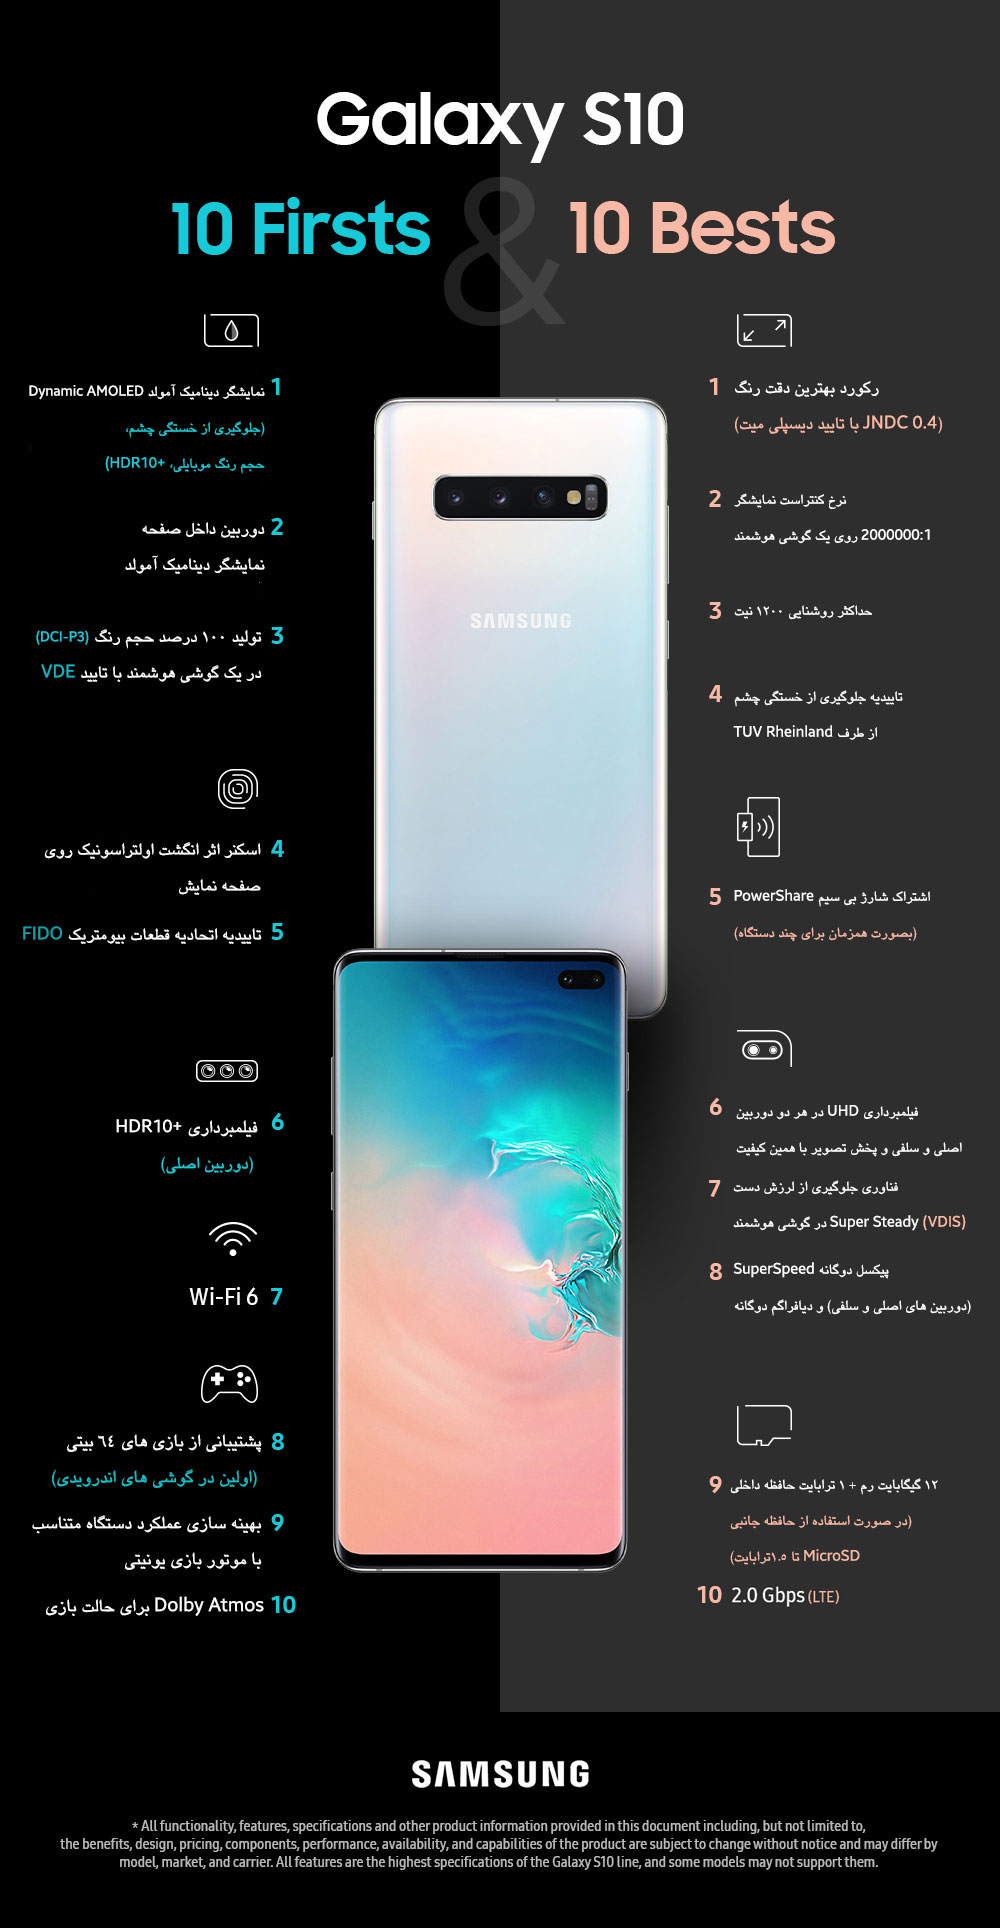 HHP 10 Firsts and 10 Bests from the Galaxy S10 Pic